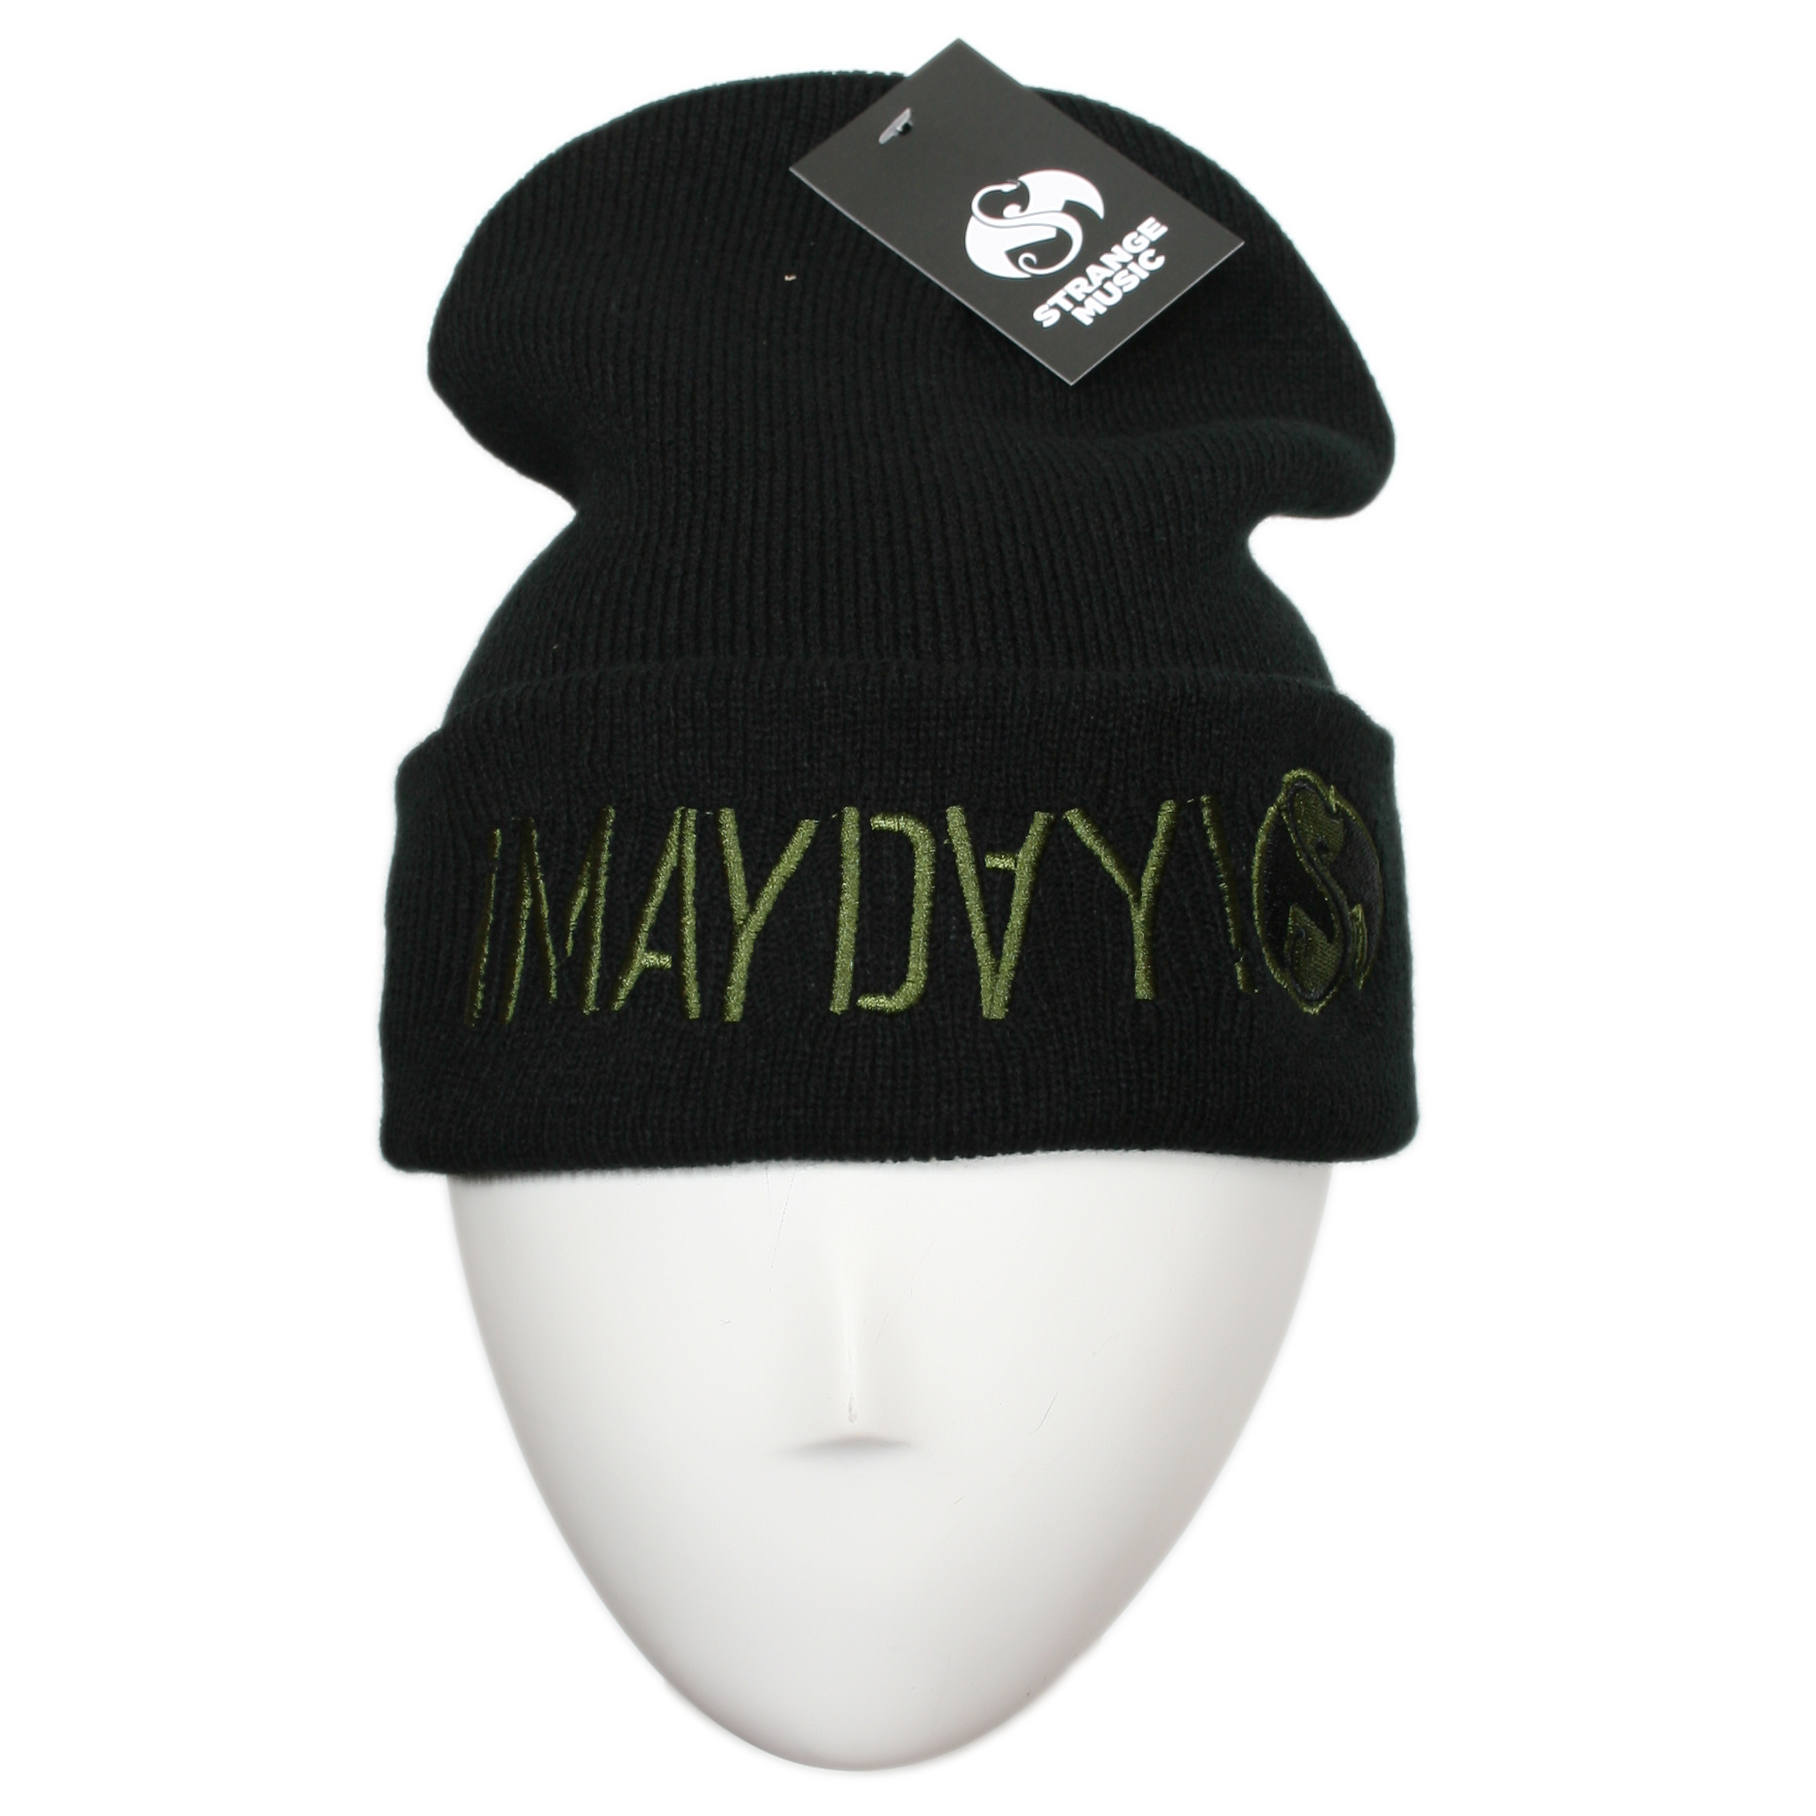 MAYDAY! - Black 2017 Embroidered Skull Cap